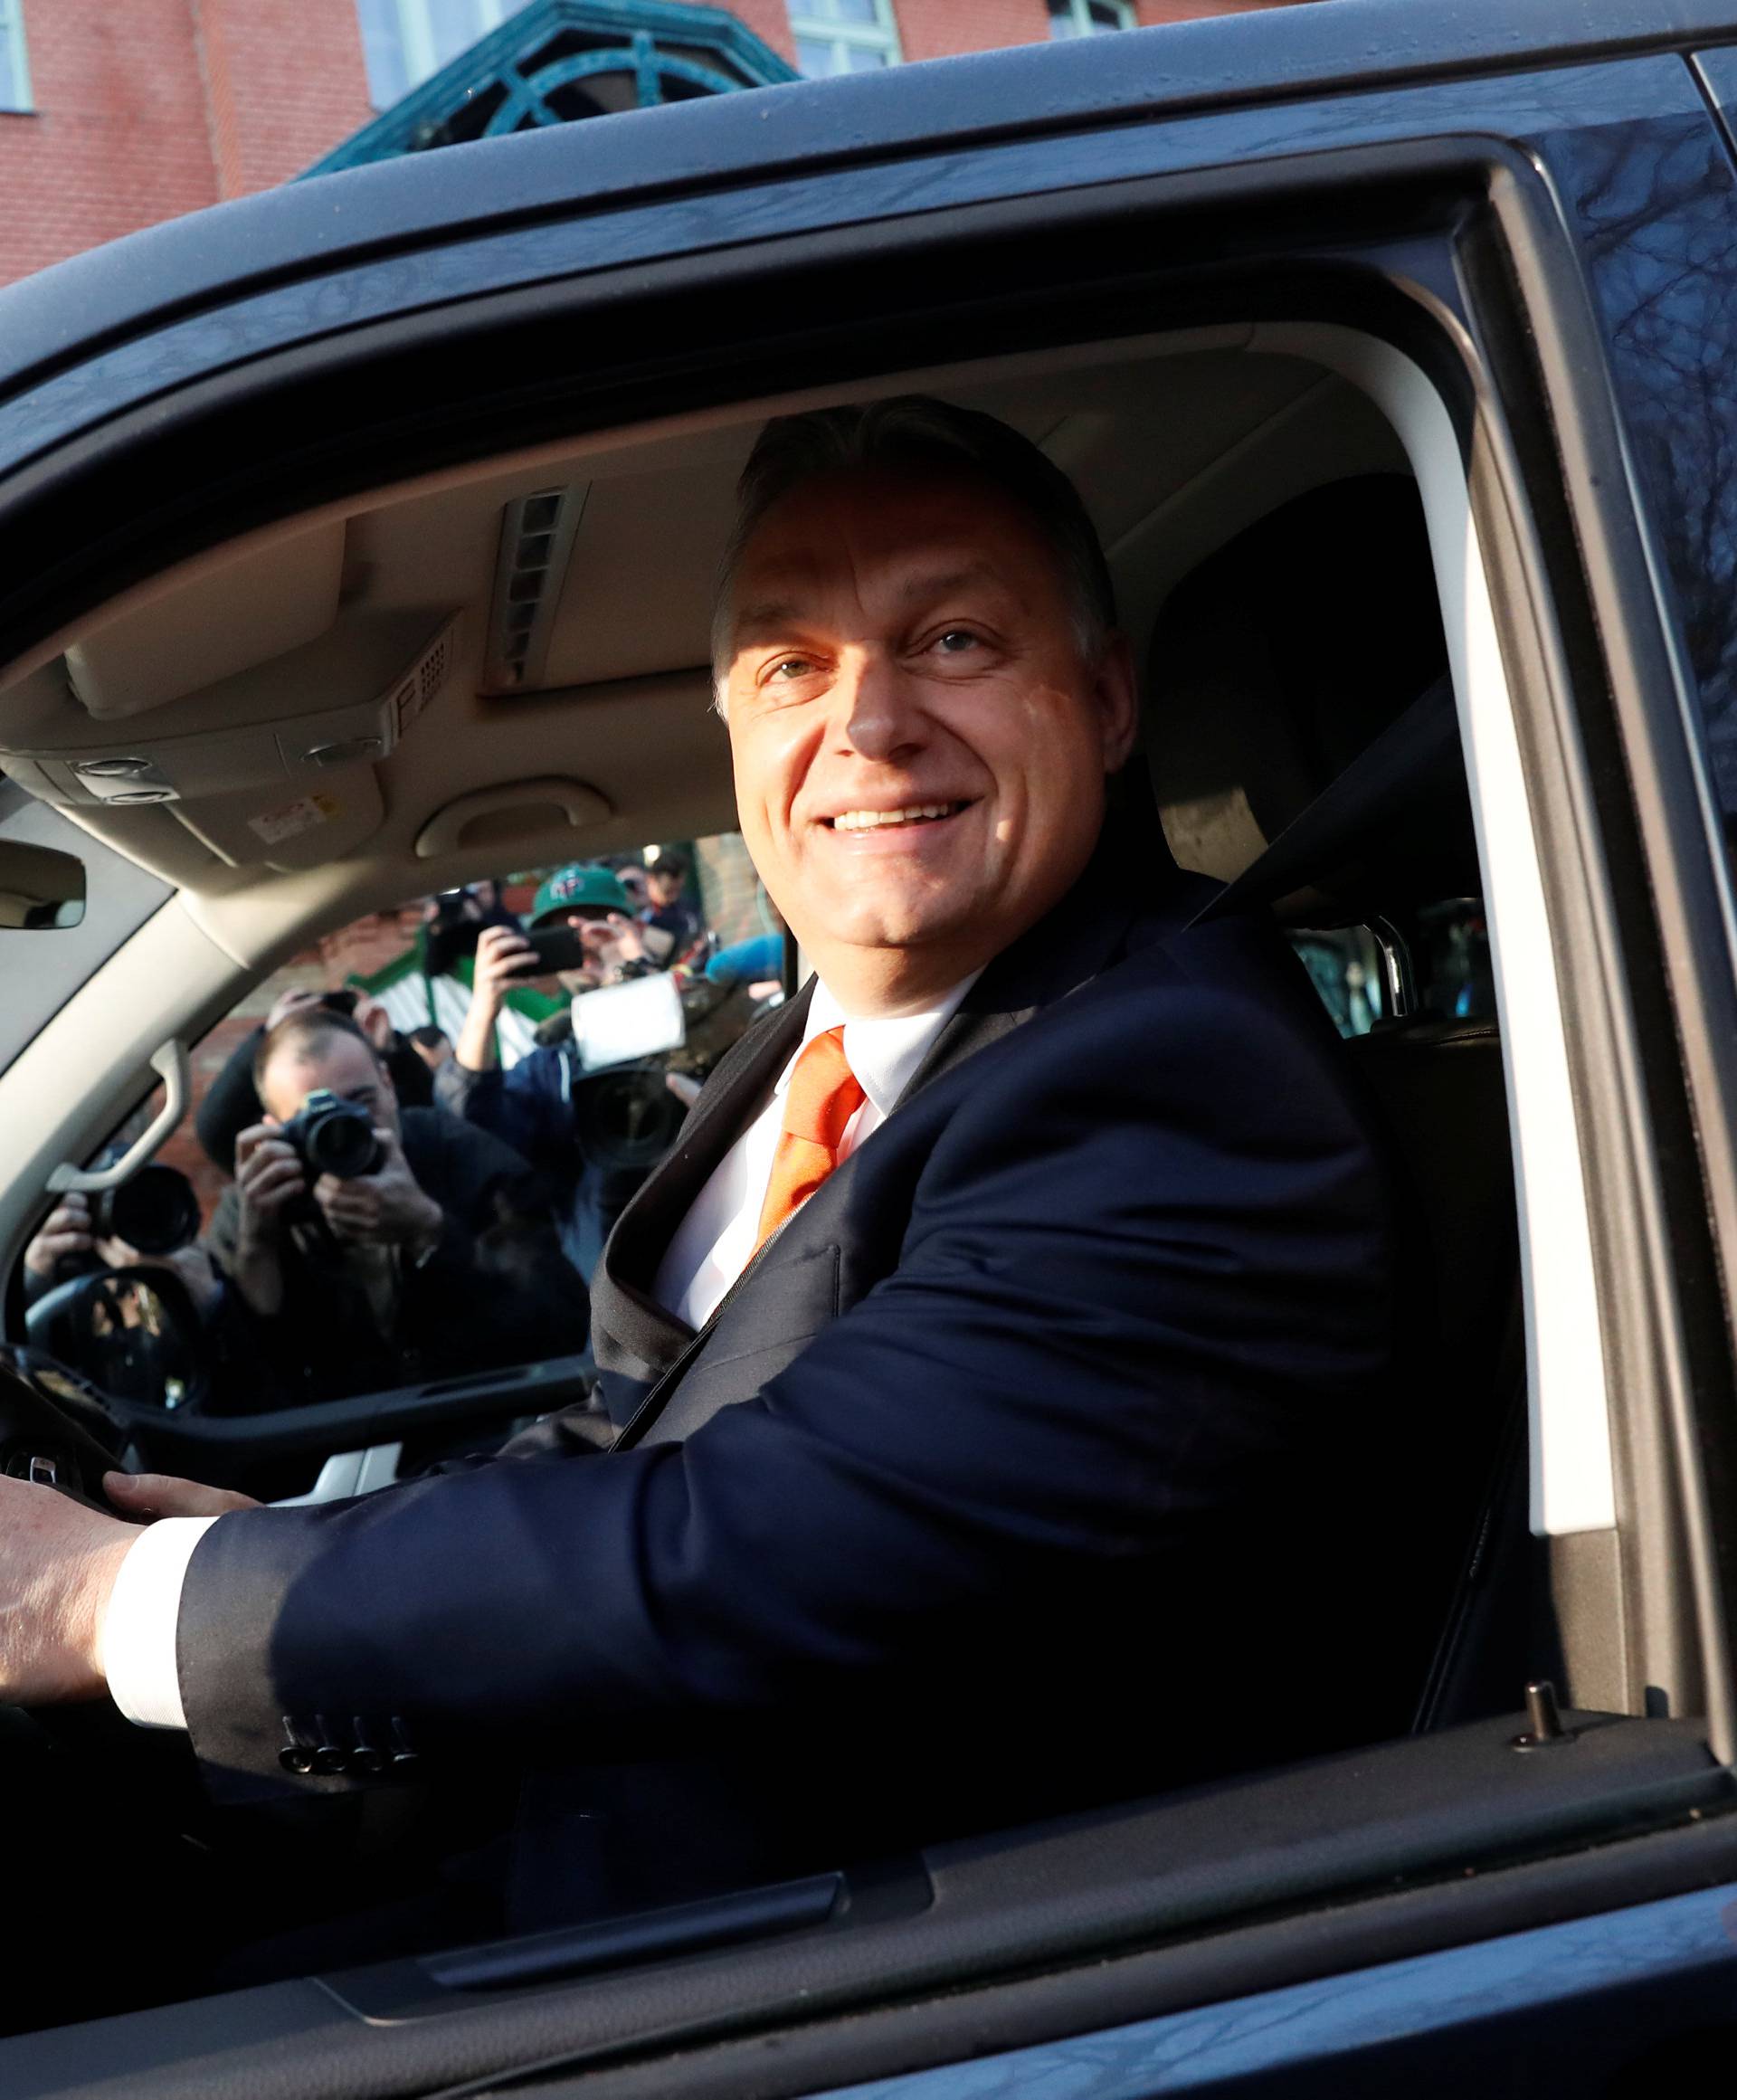 Current Hungarian Prime Minister Viktor Orban smiles to the media from his car after leaving a polling station during Hungarian parliamentary election in Budapest